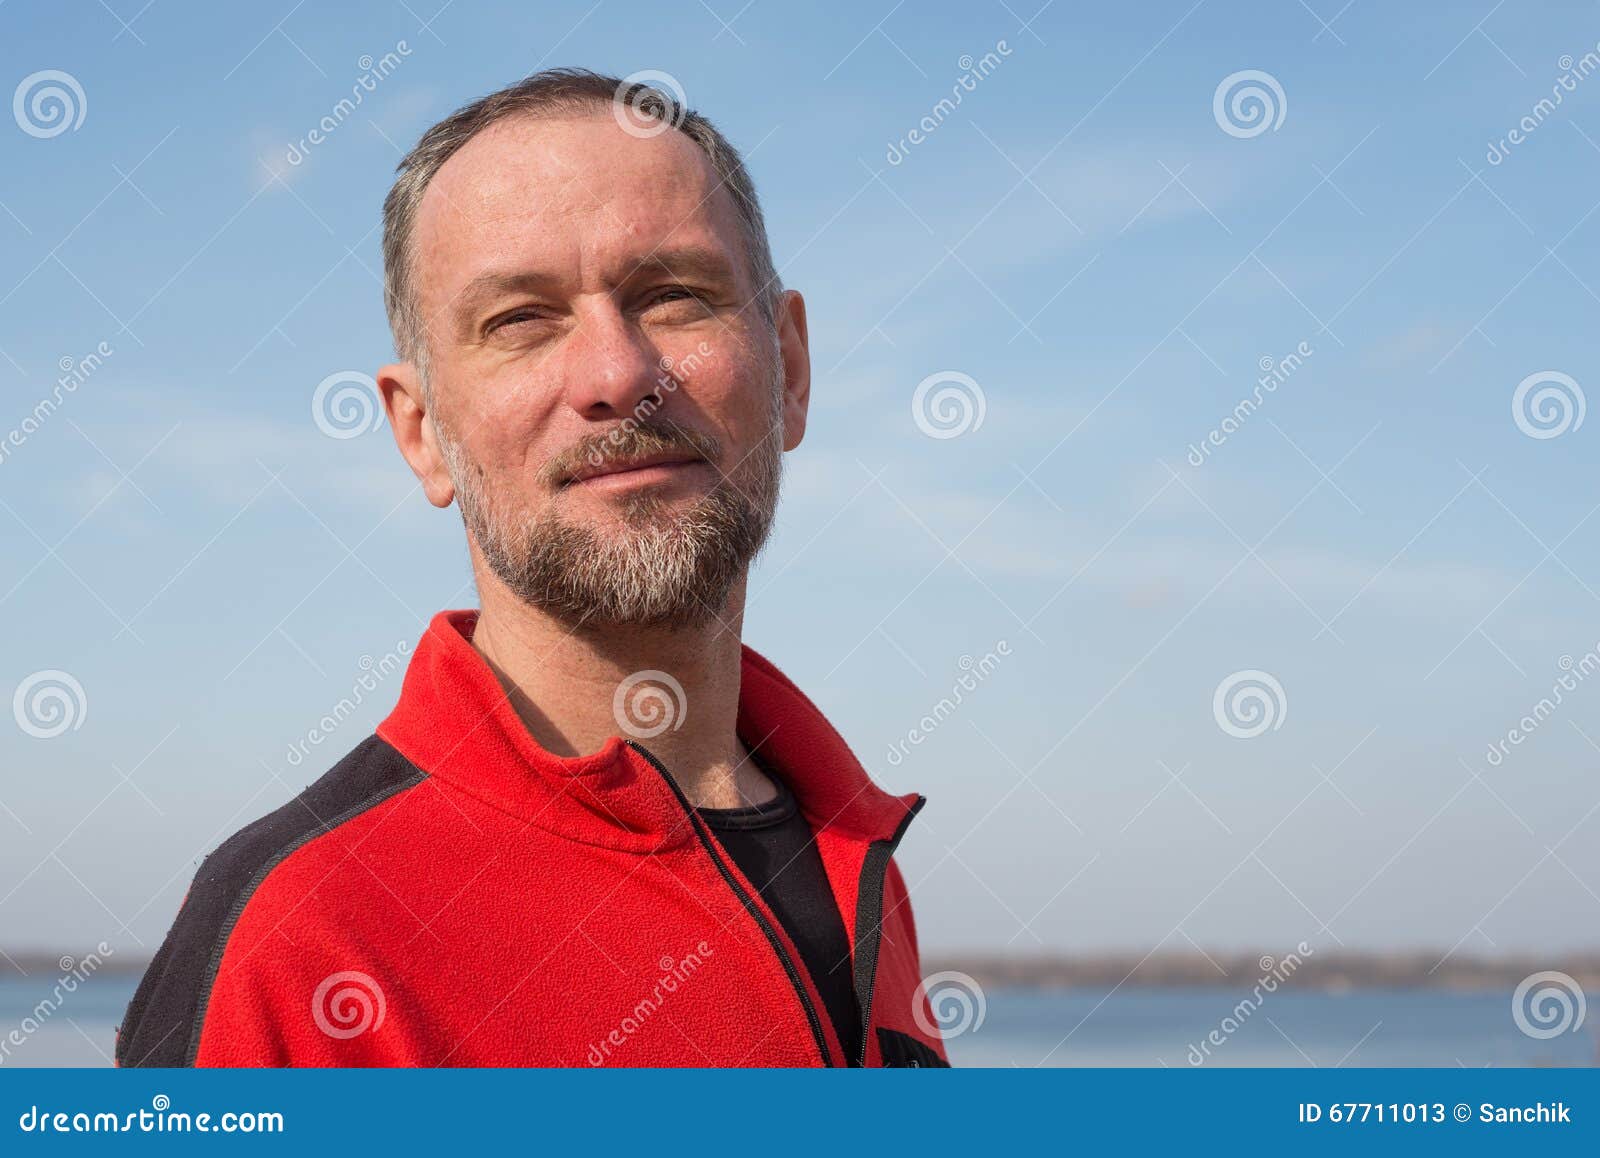 Portrait of Bearded Dreaming Man. Stock Image - Image of blurred, blue ...